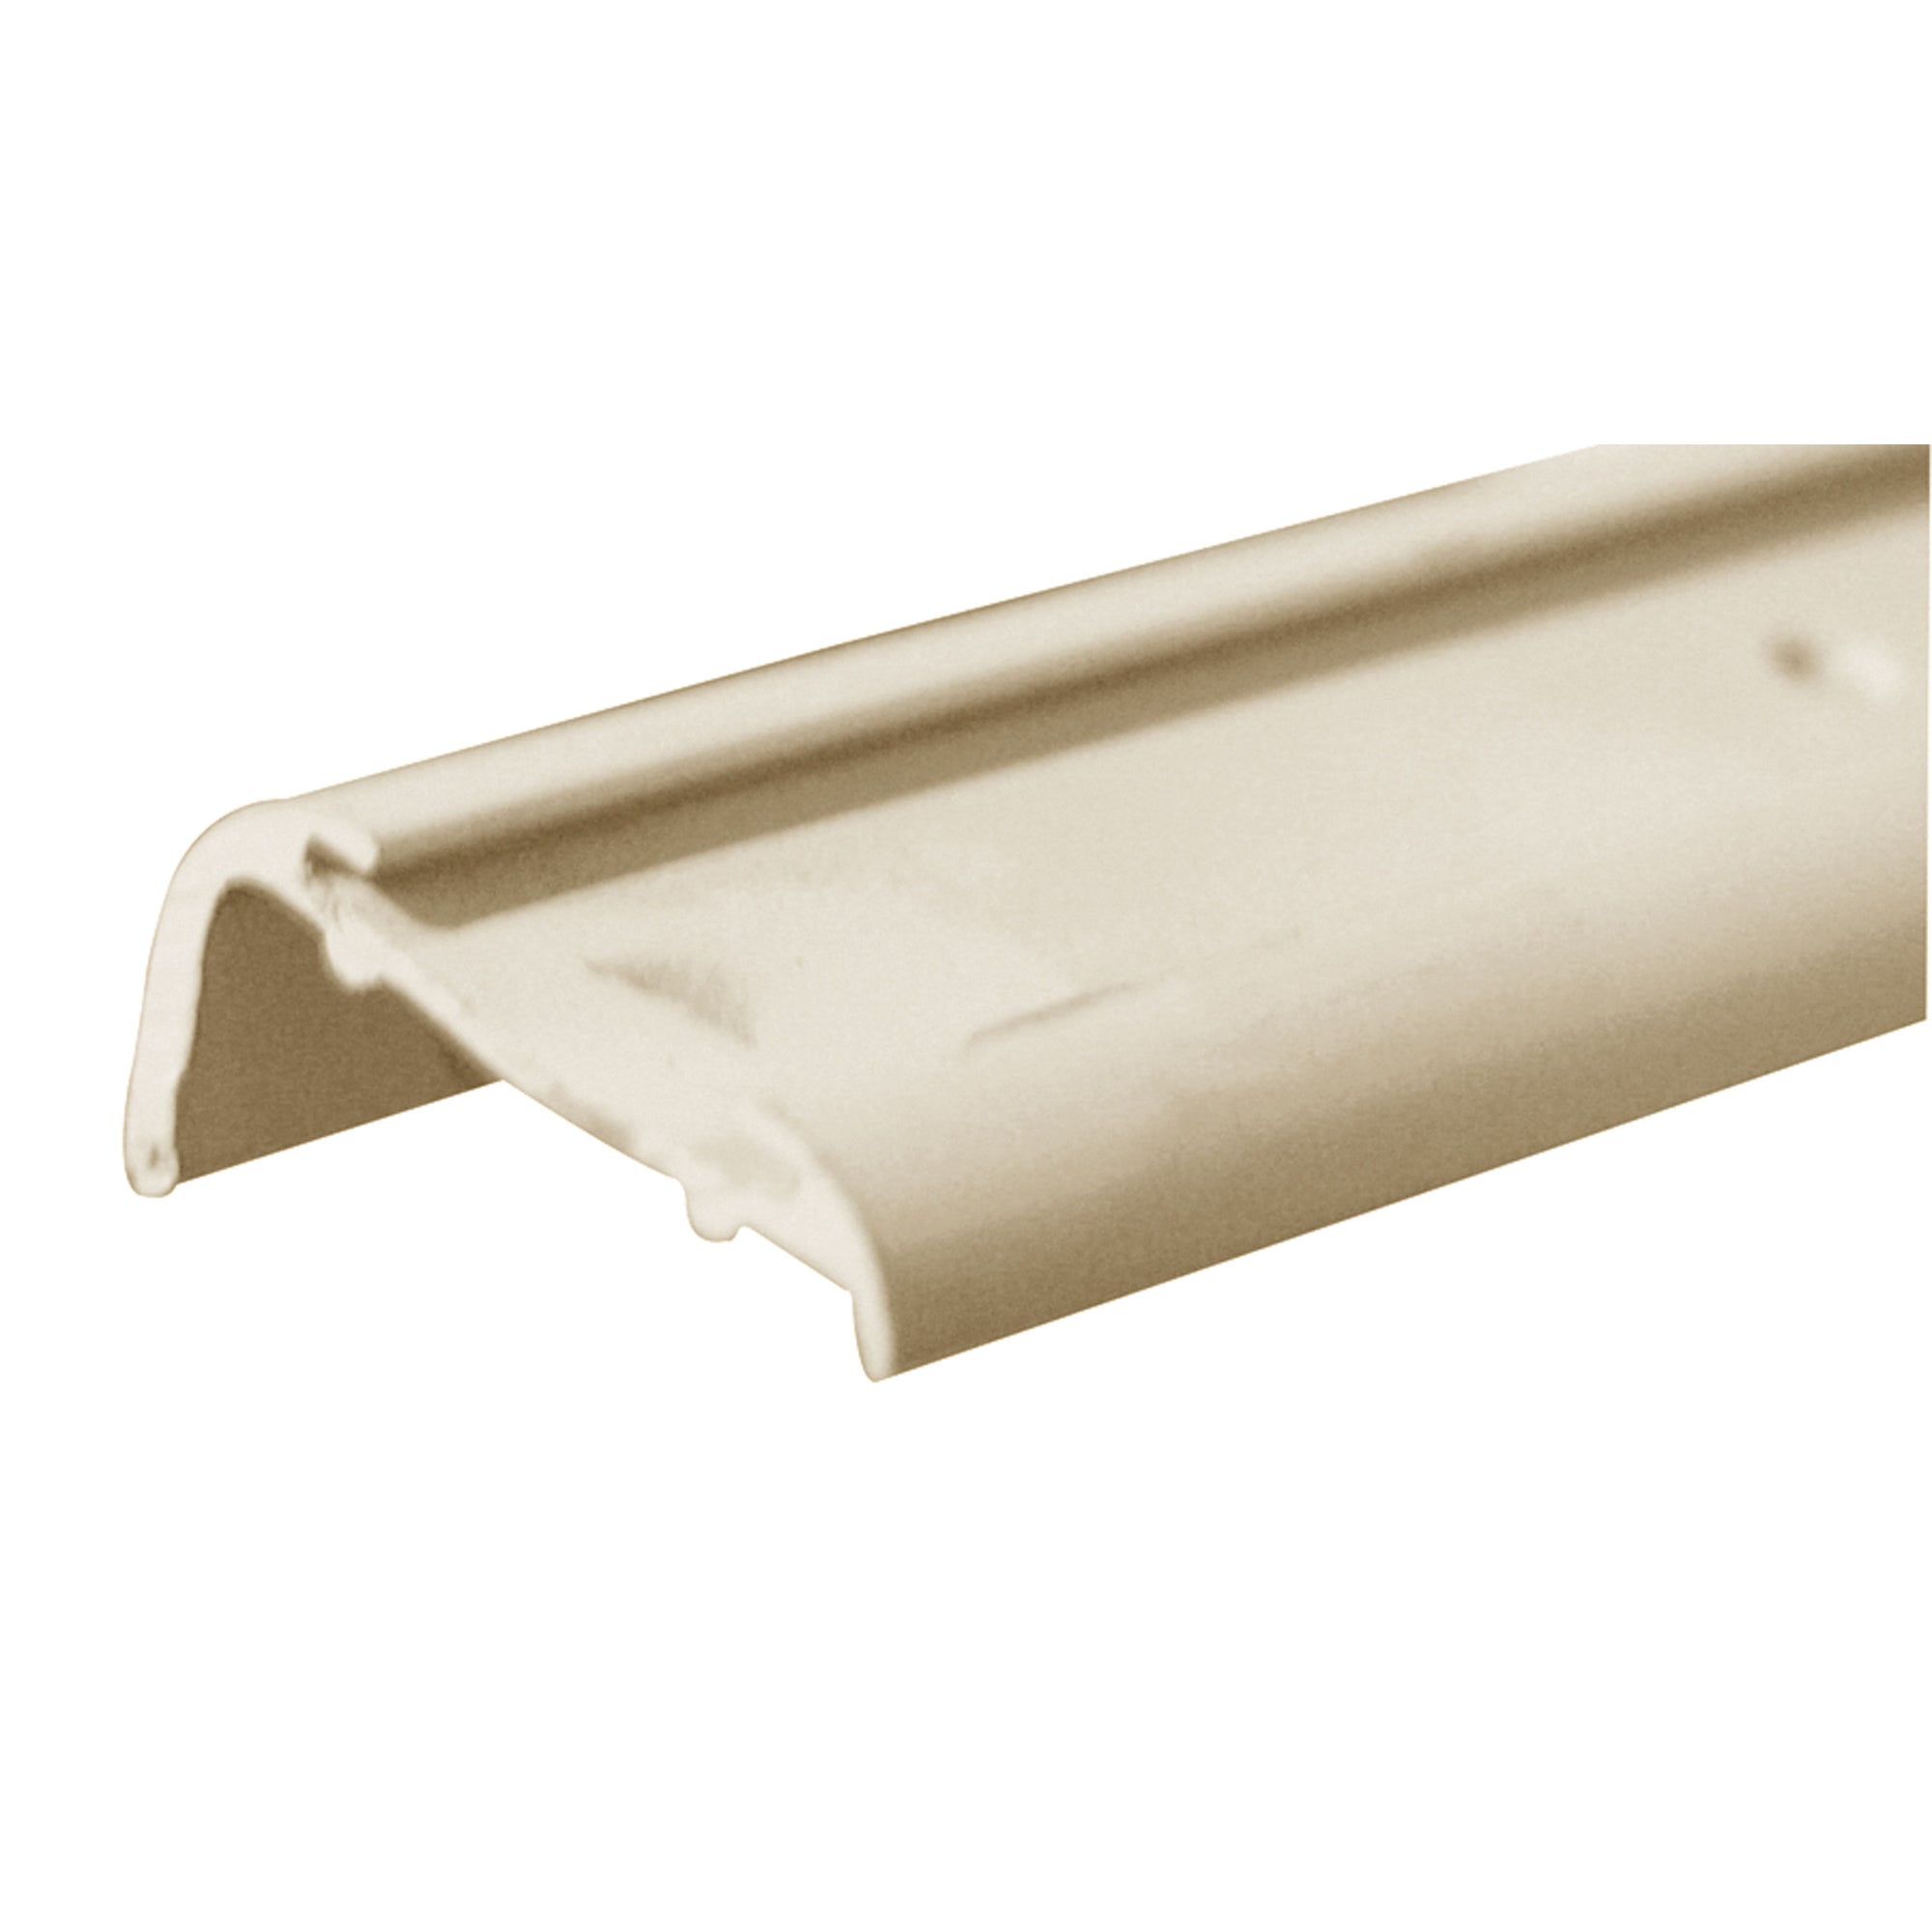 AP Products 021-85004-8 Insert Roof Edge - 8 ft. (5 Pack)